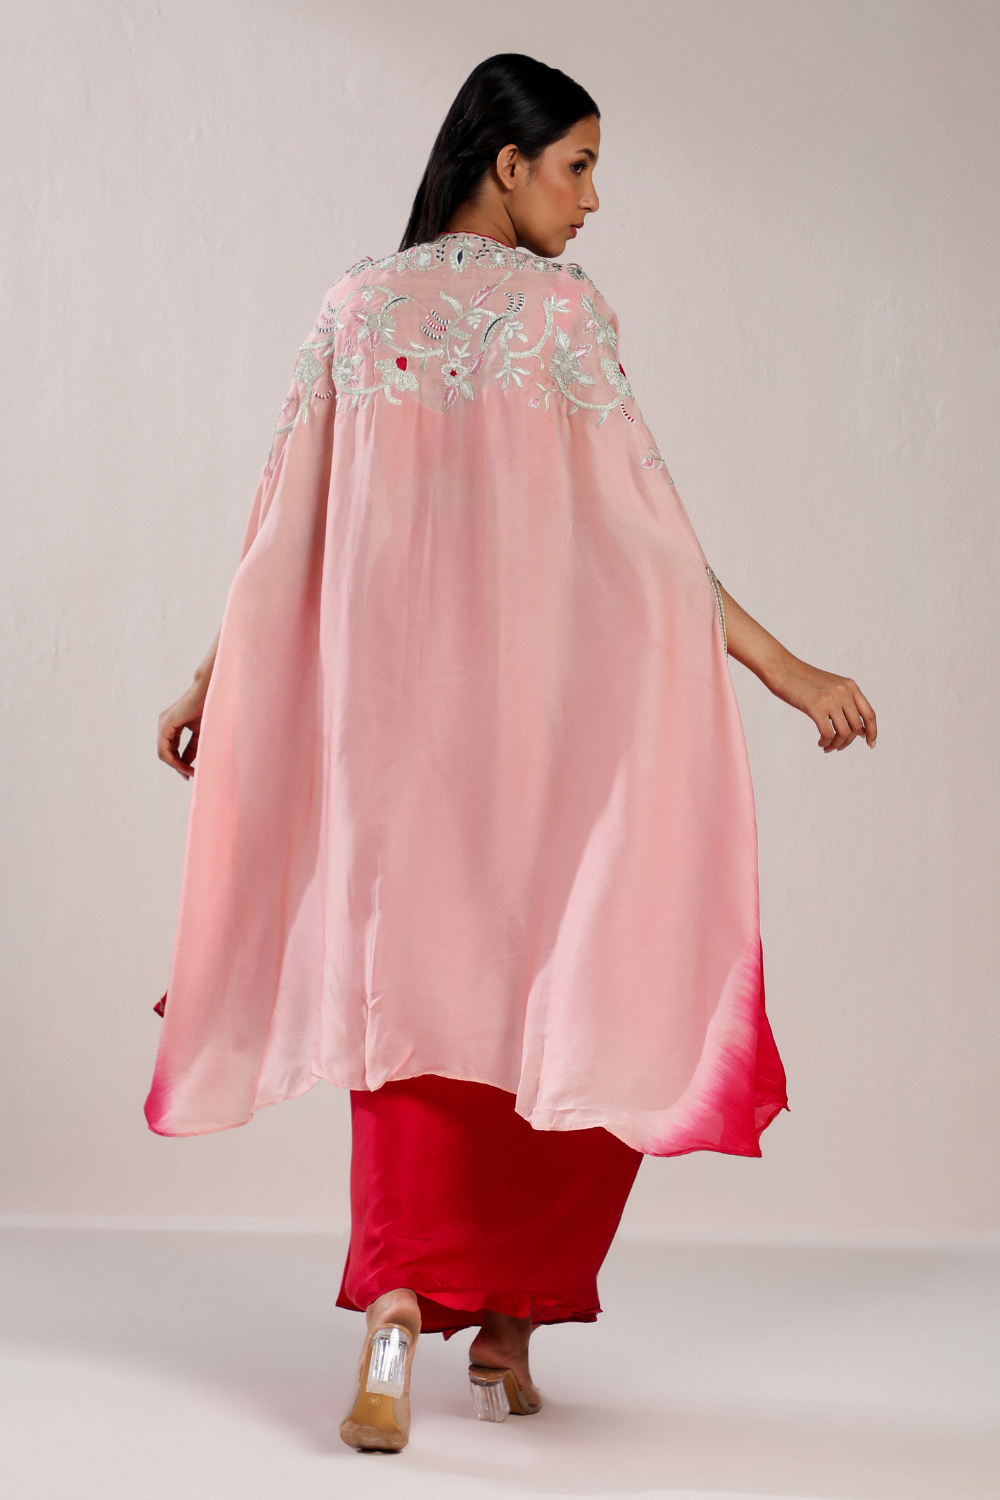 RED RESHAM BLOUSE WITH DRAPED SKIRT & CAPE